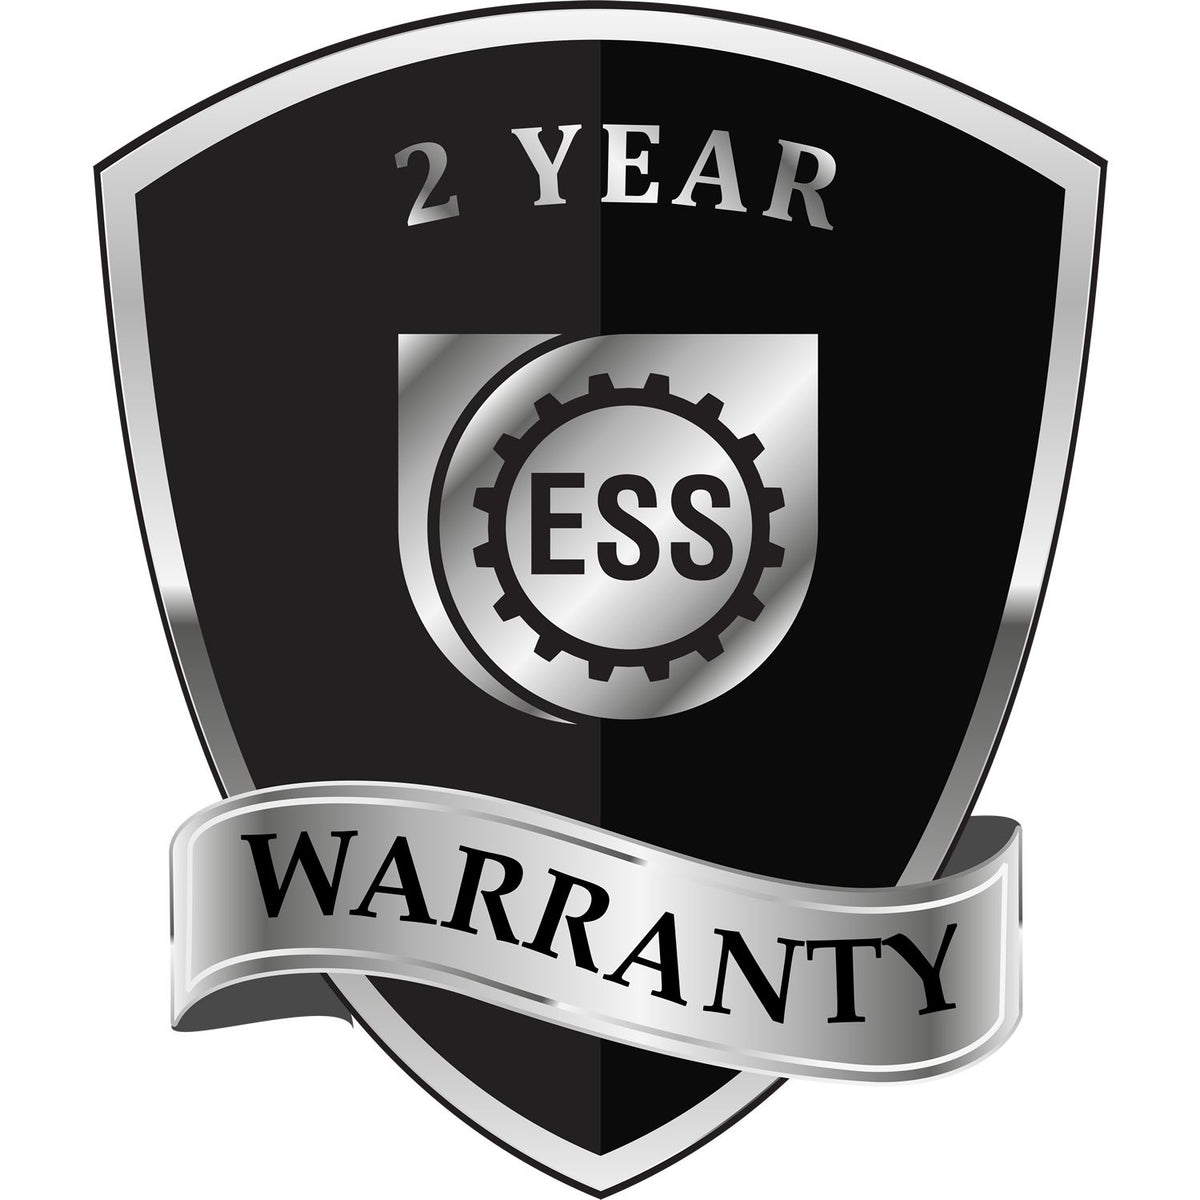 A badge or emblem showing a warranty icon for the Soft New Jersey Professional Engineer Seal